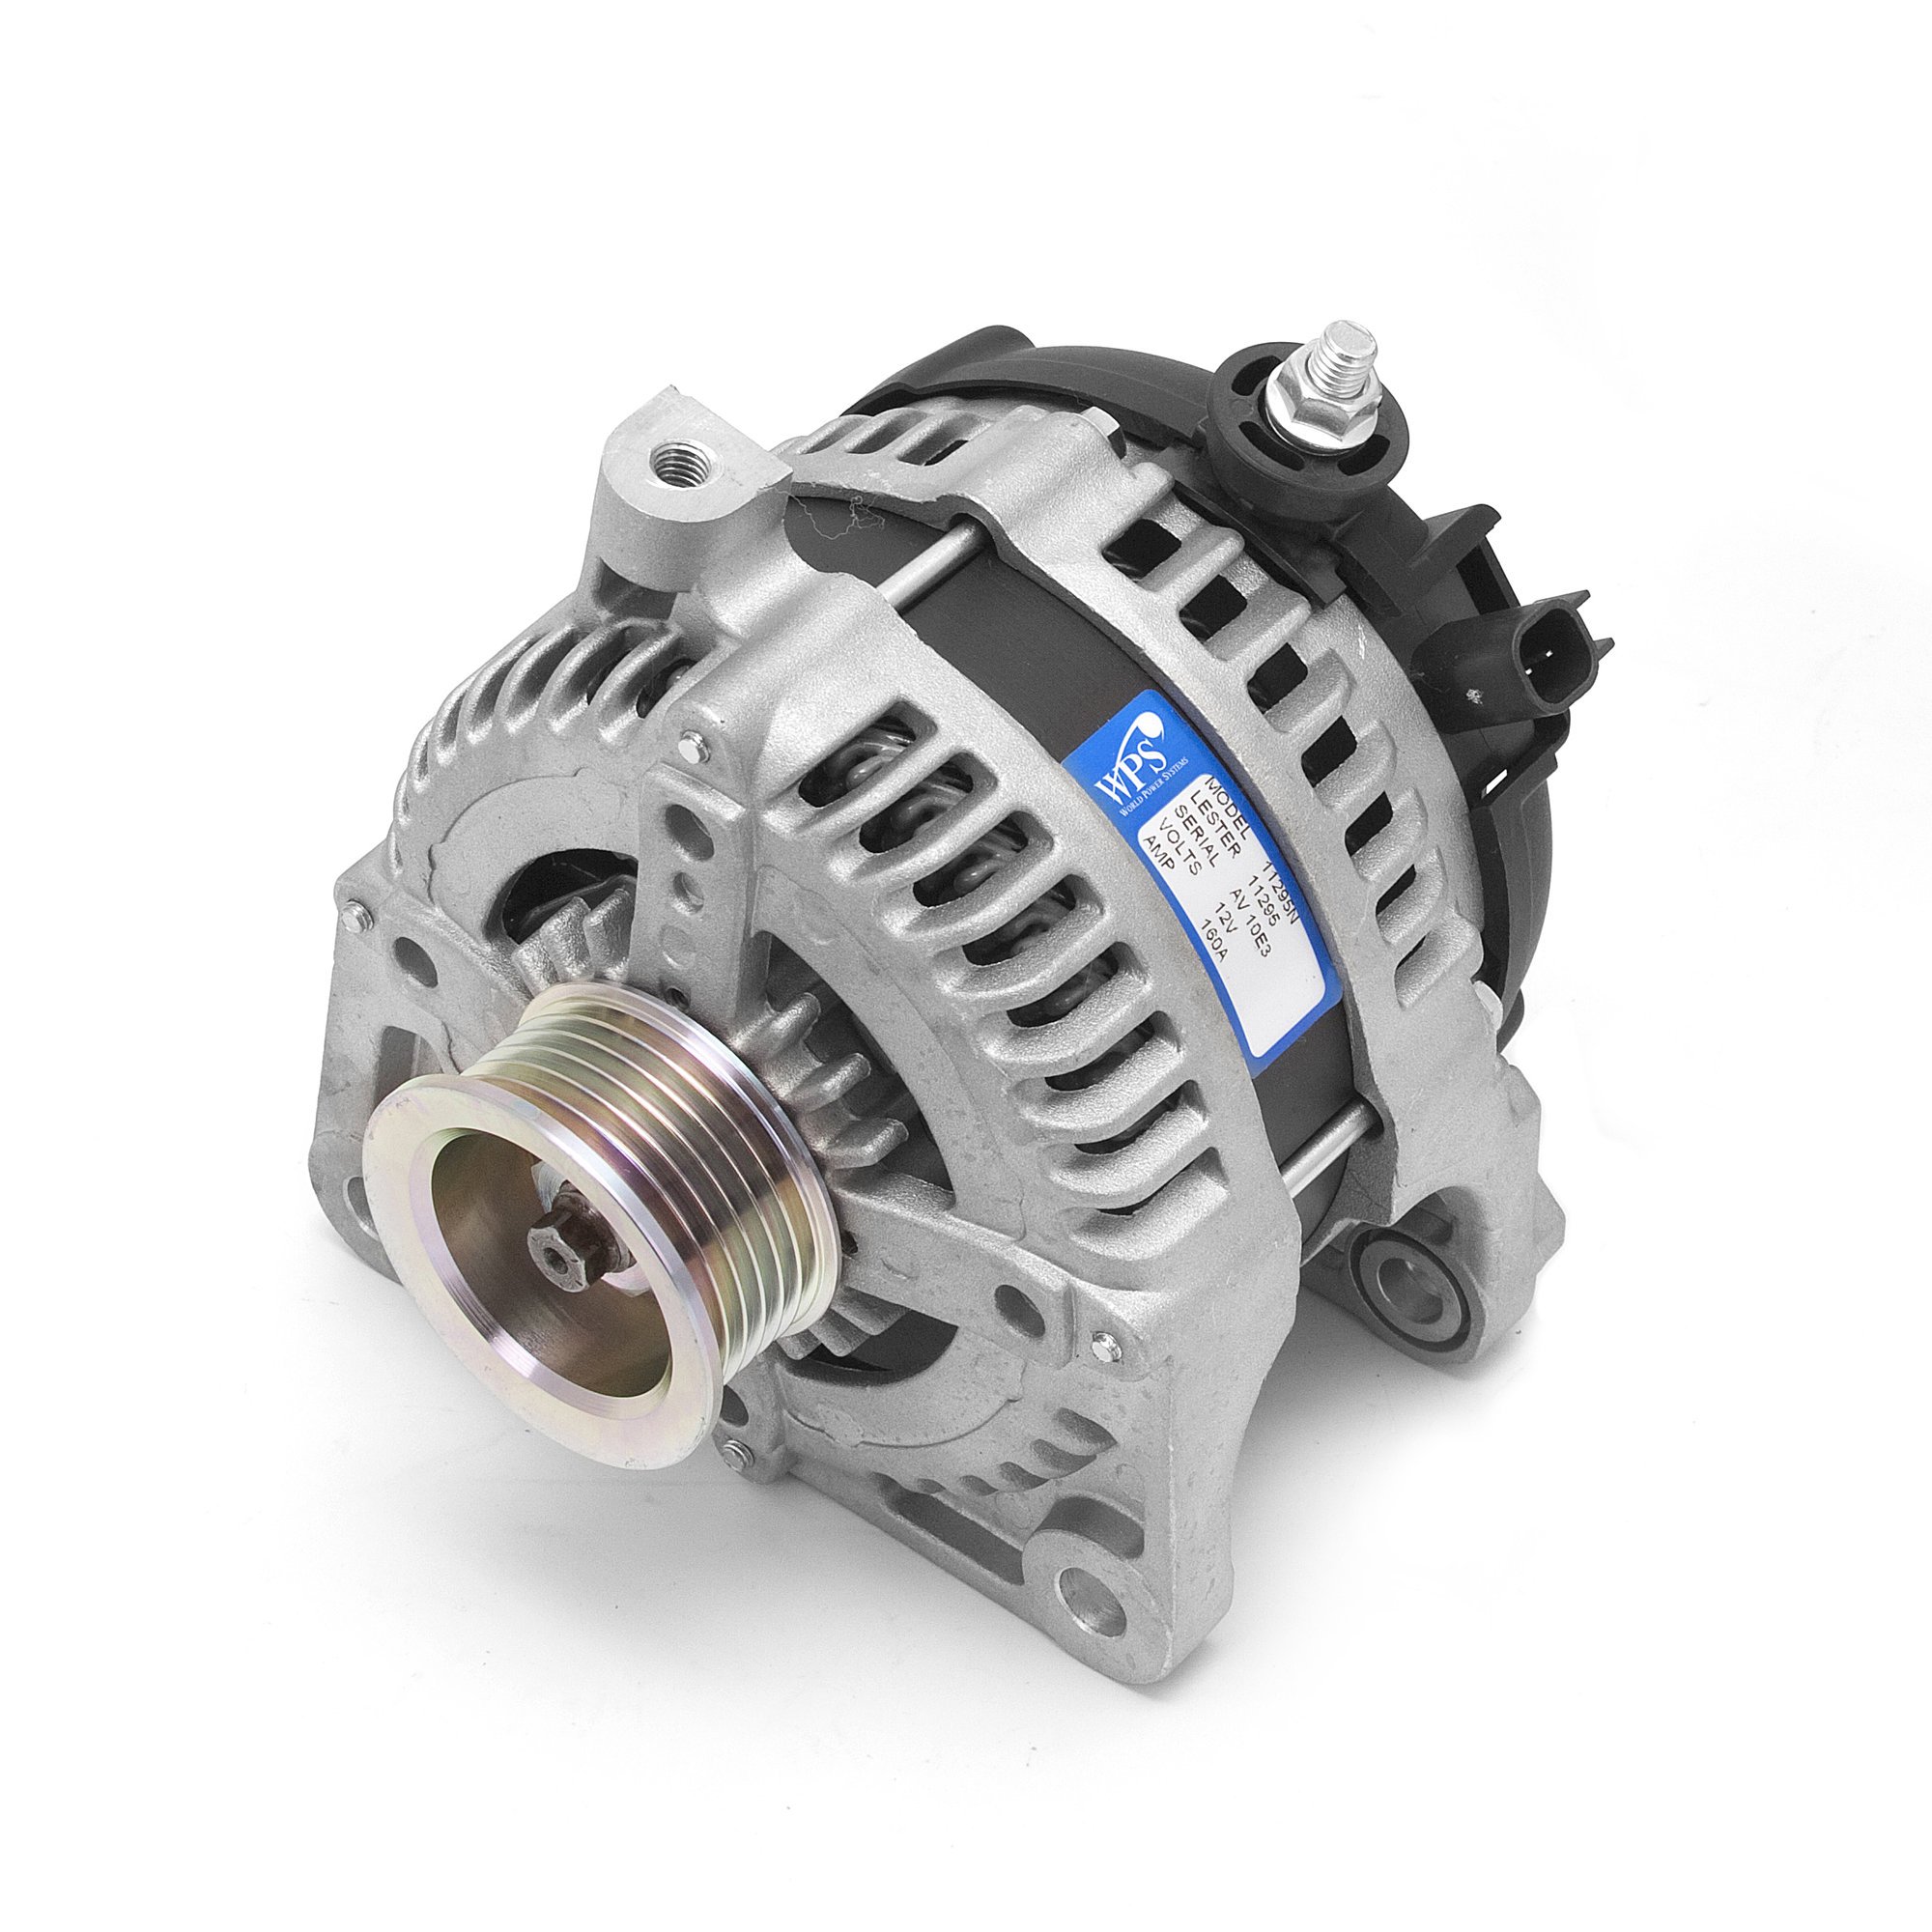 OMIX 17225.18 Replacement Alternator for 07